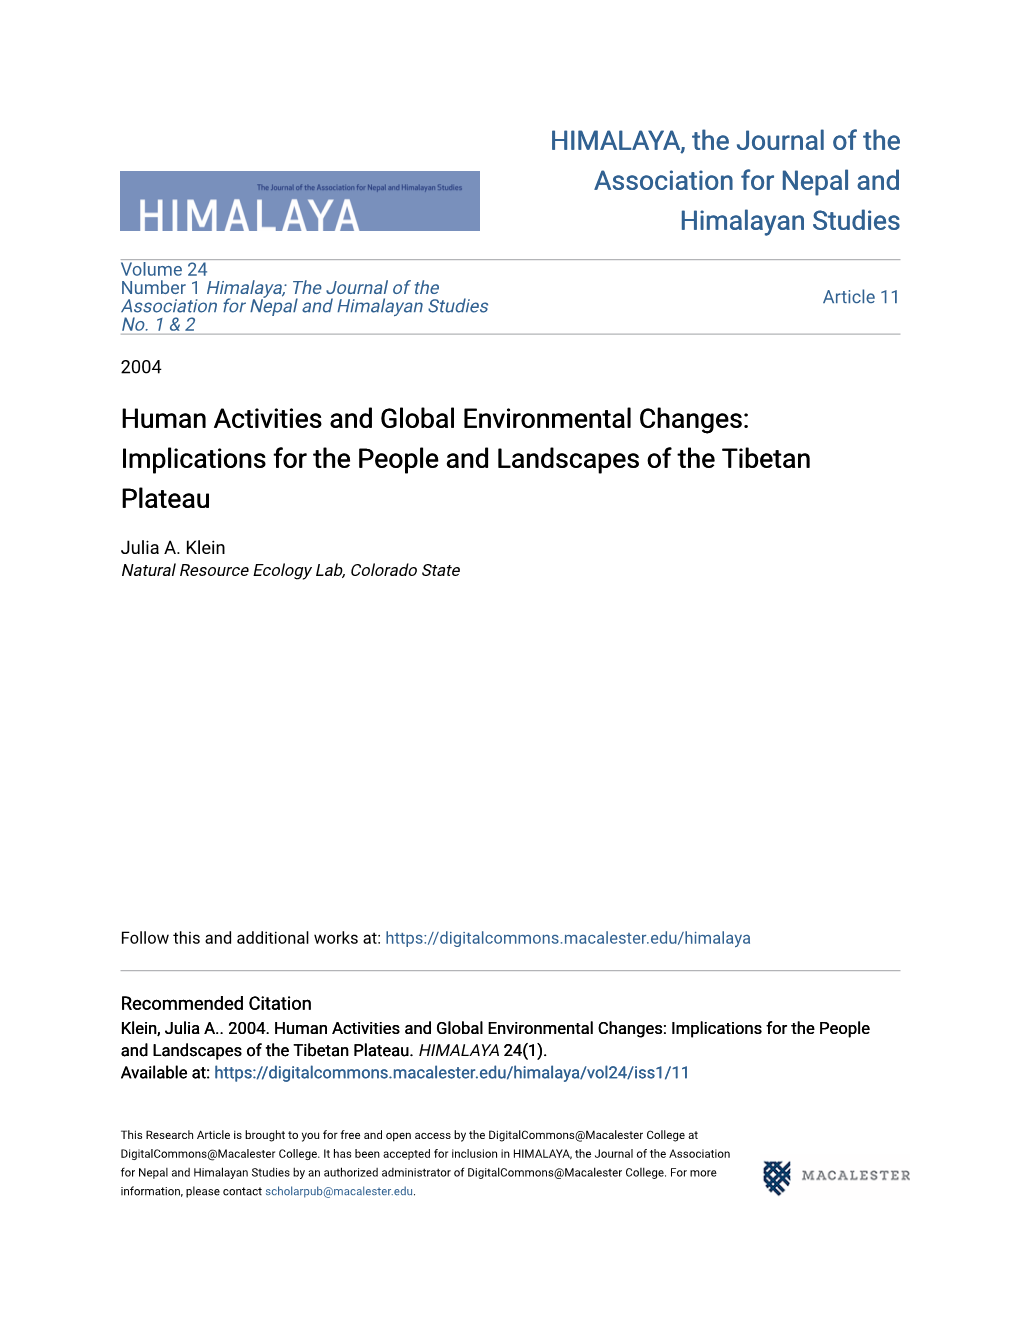 Implications for the People and Landscapes of the Tibetan Plateau